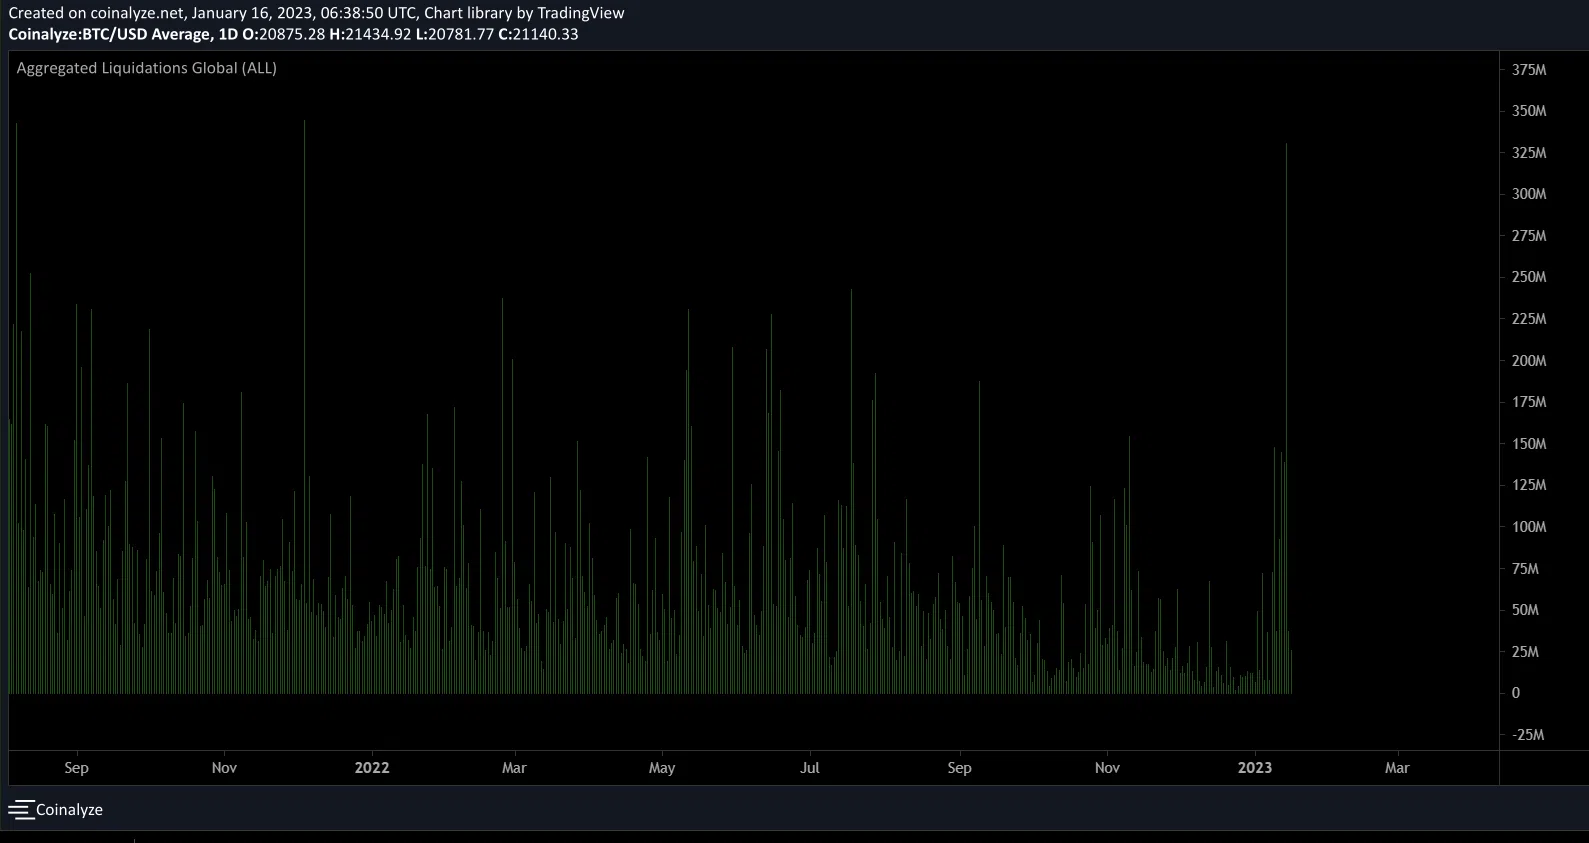 Shorts liquidations were at their highest since 2021. (Coinanylze)